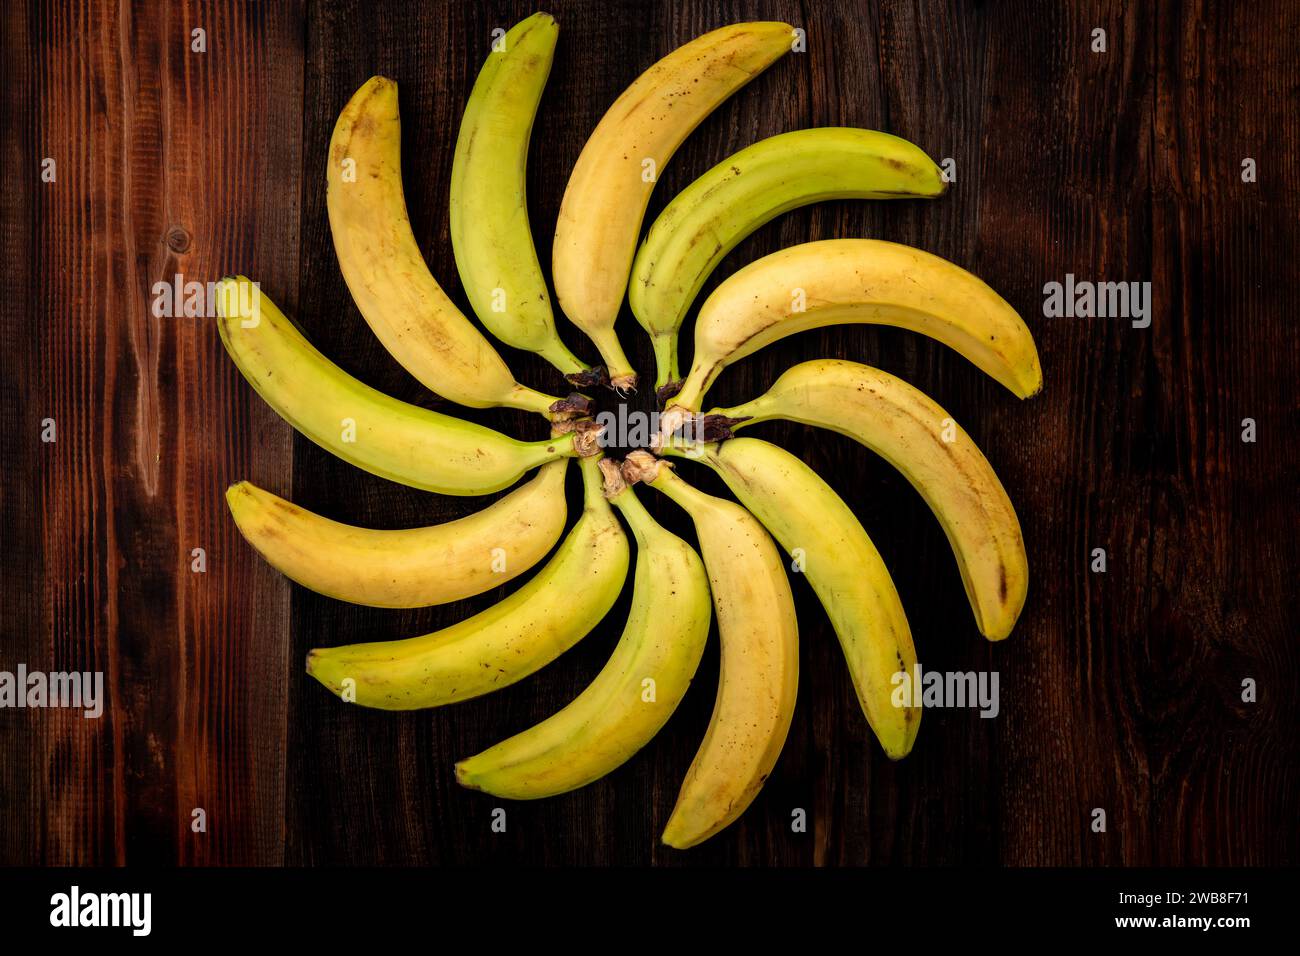 Bananas on brown wooden table top view. Figured position of bananas in geometric shape. bananas are laid out in the shape of the sun. Stock Photo